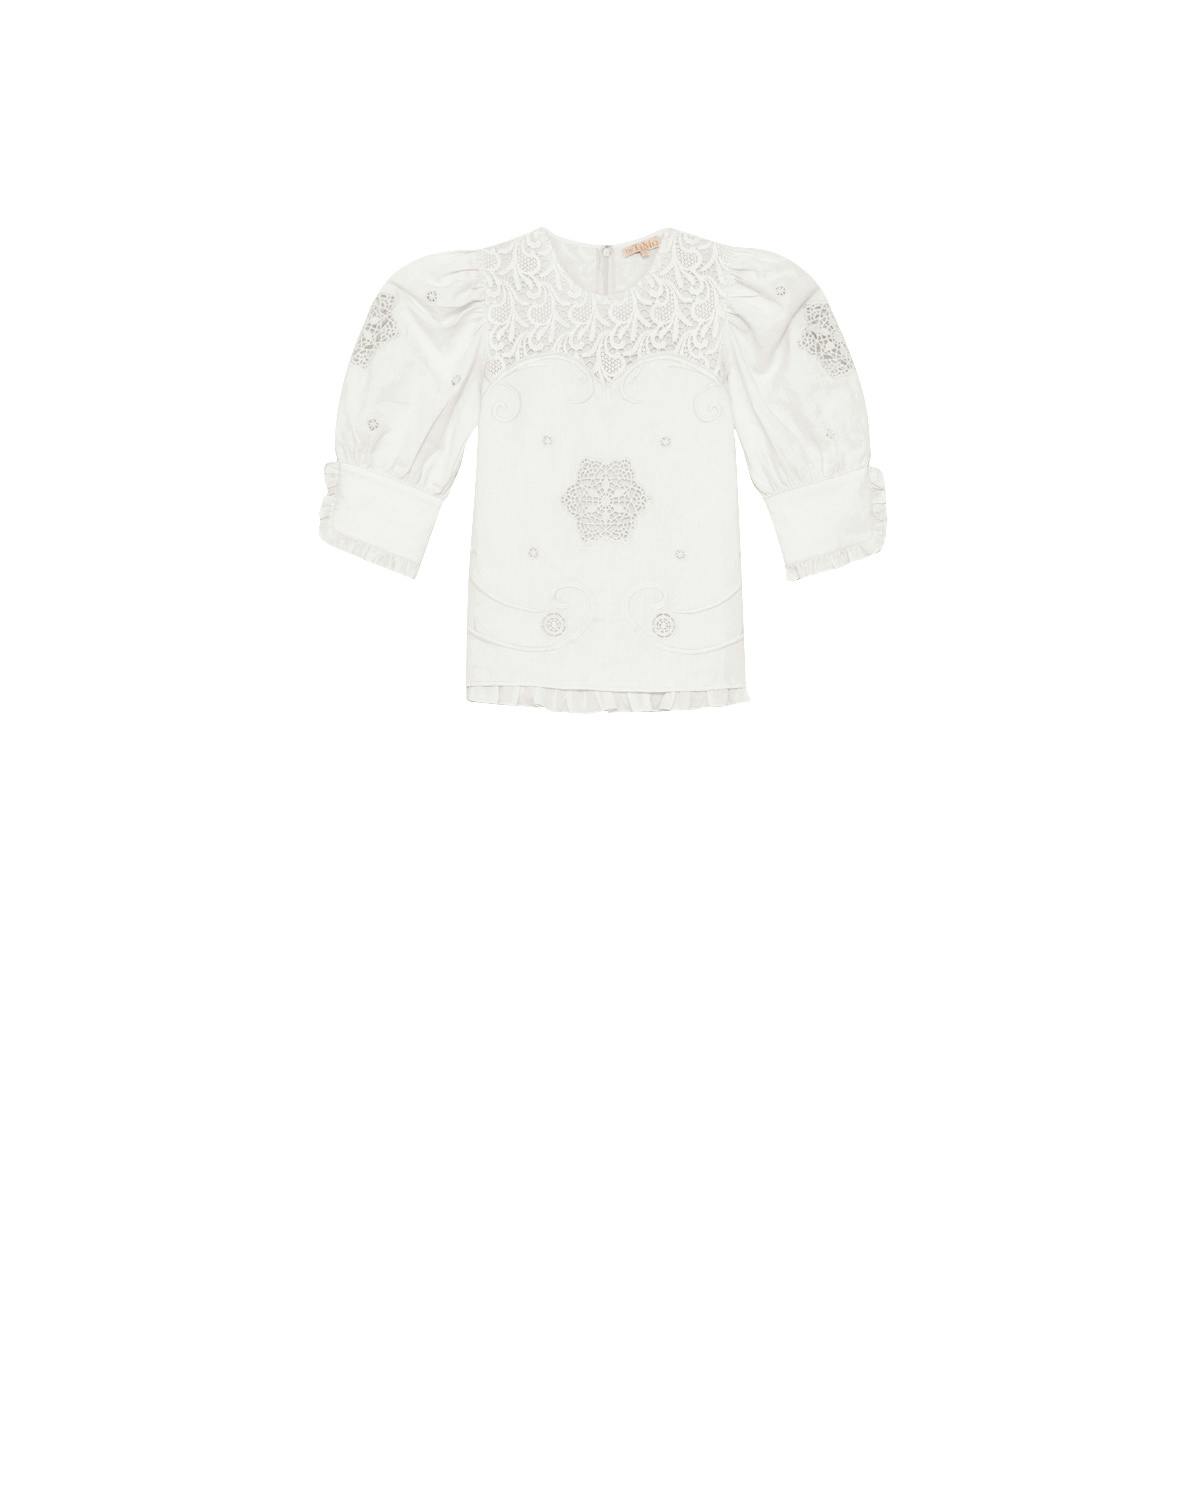 Linen Embroidery Blouse, White. Image #2